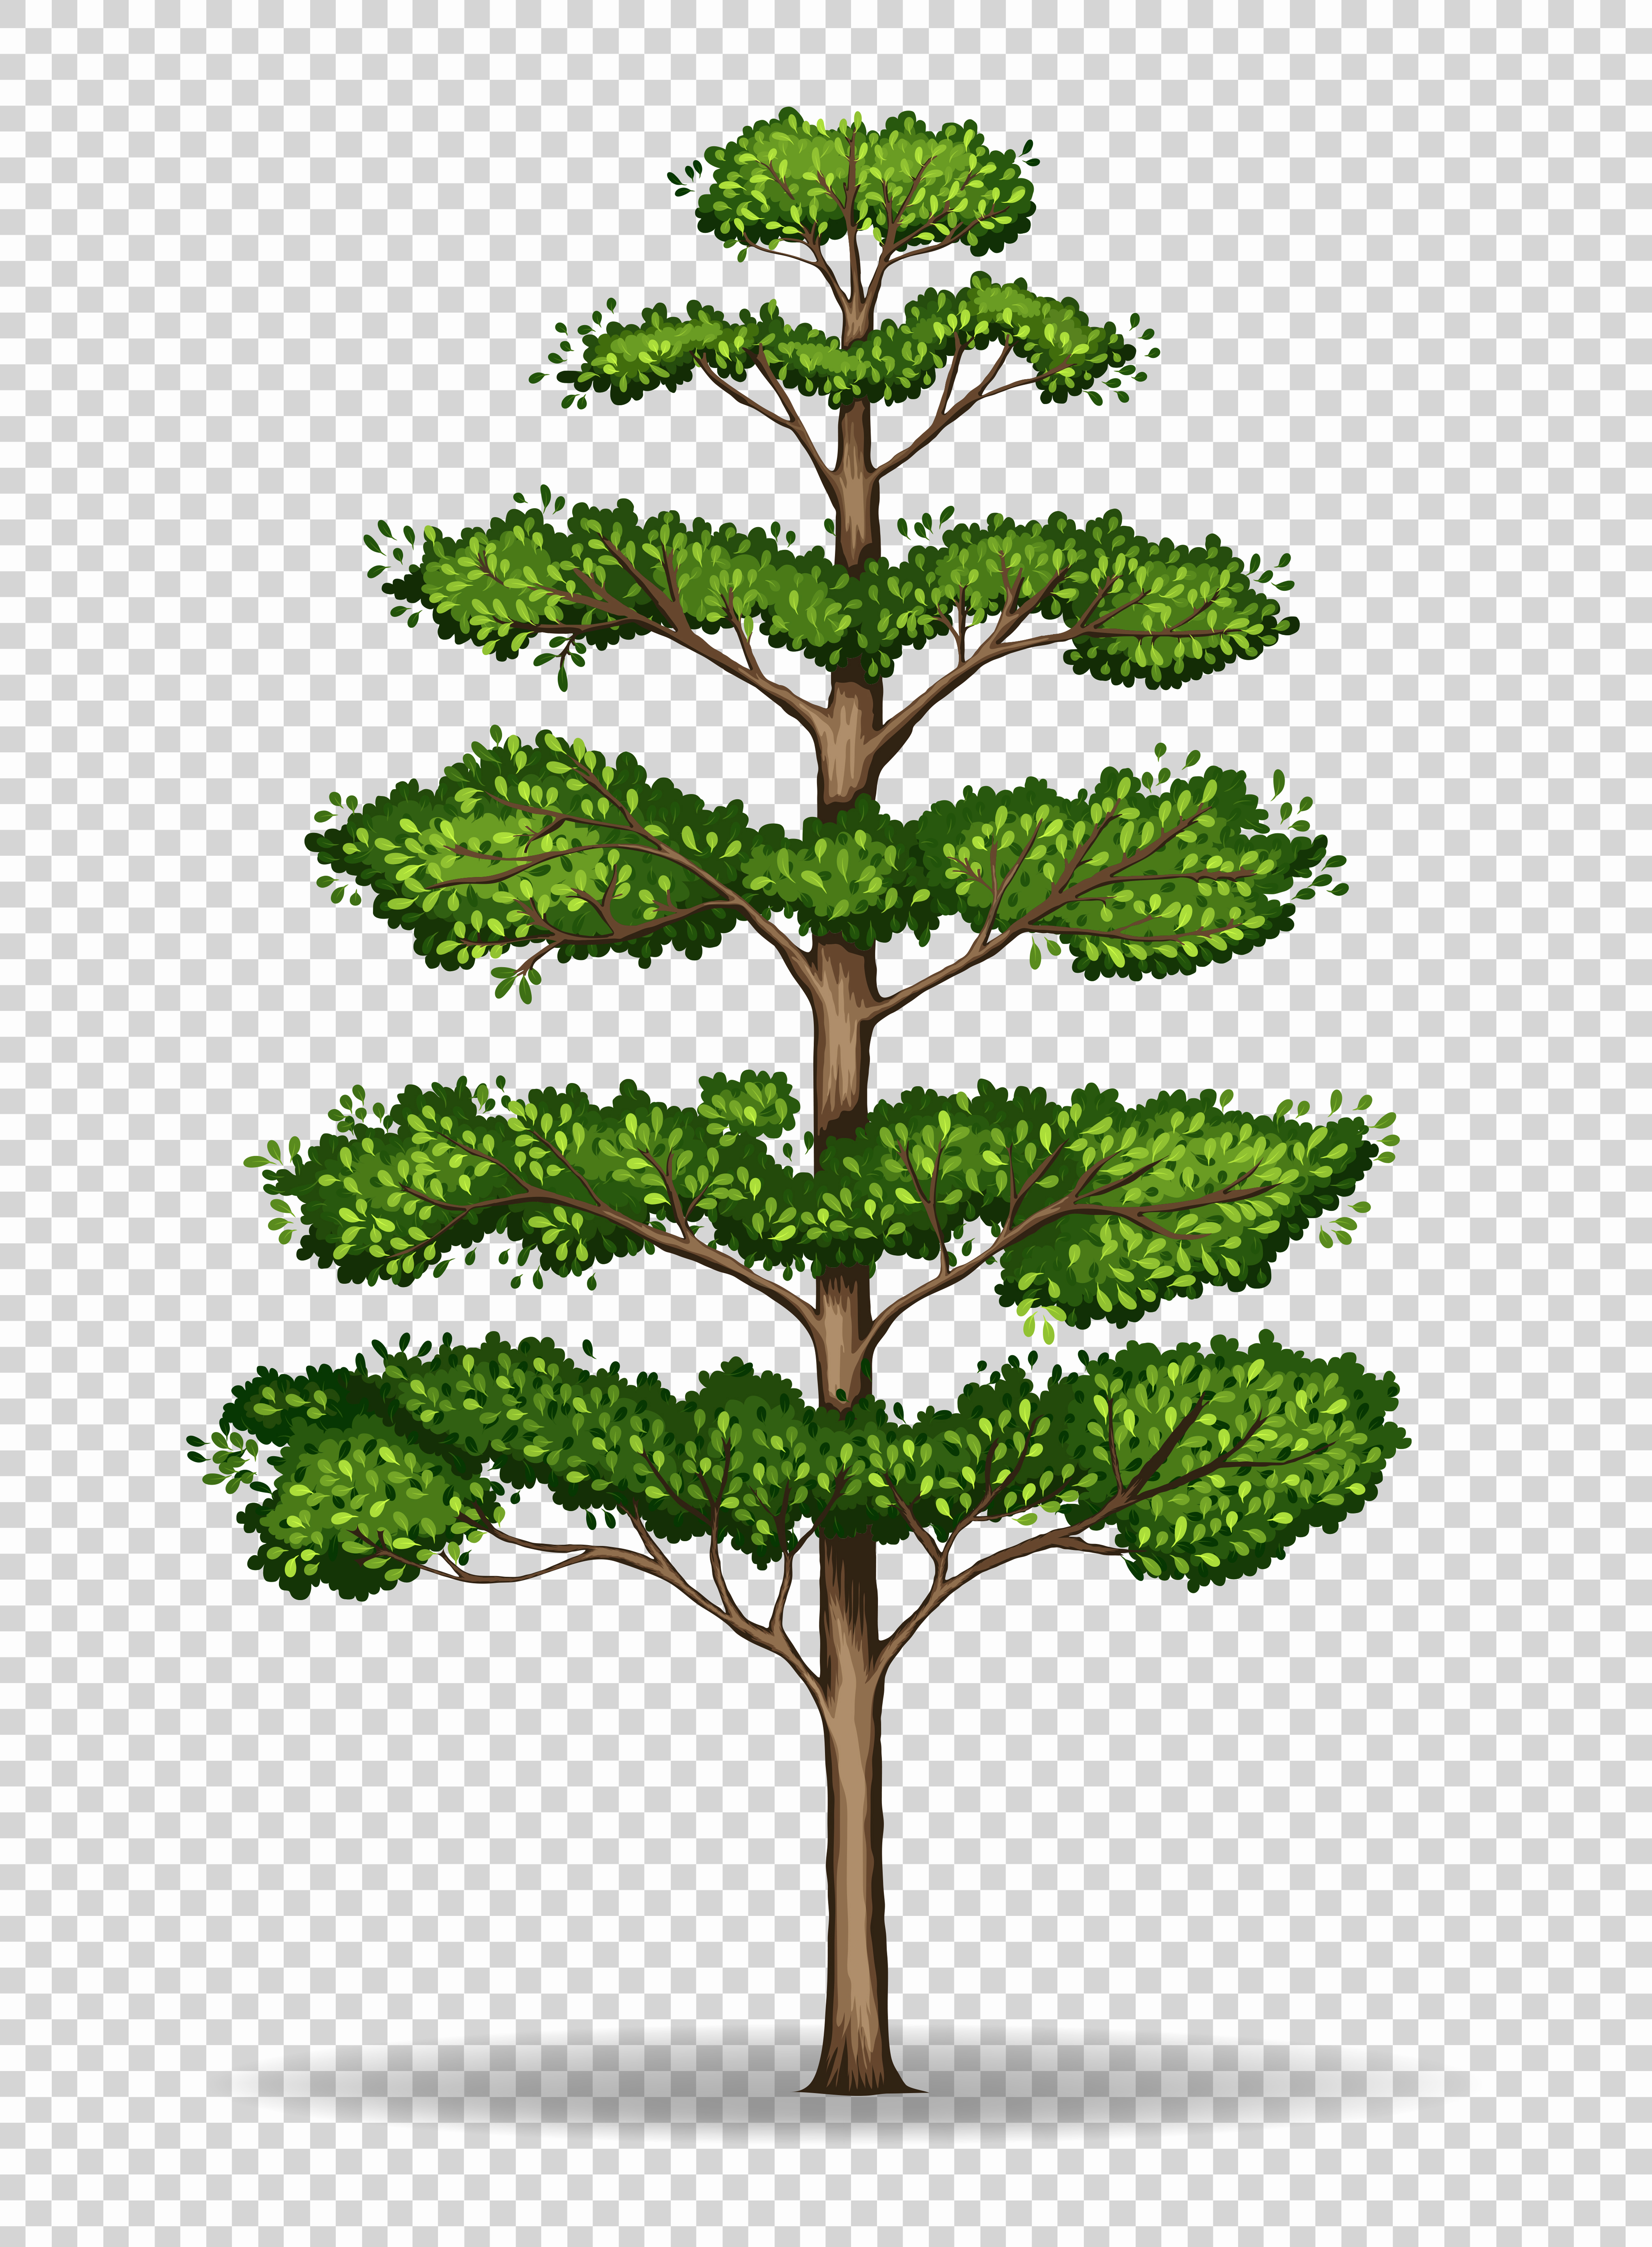 Tall Tree On Transparent Background Download Free Vectors Clipart Graphics Vector Art